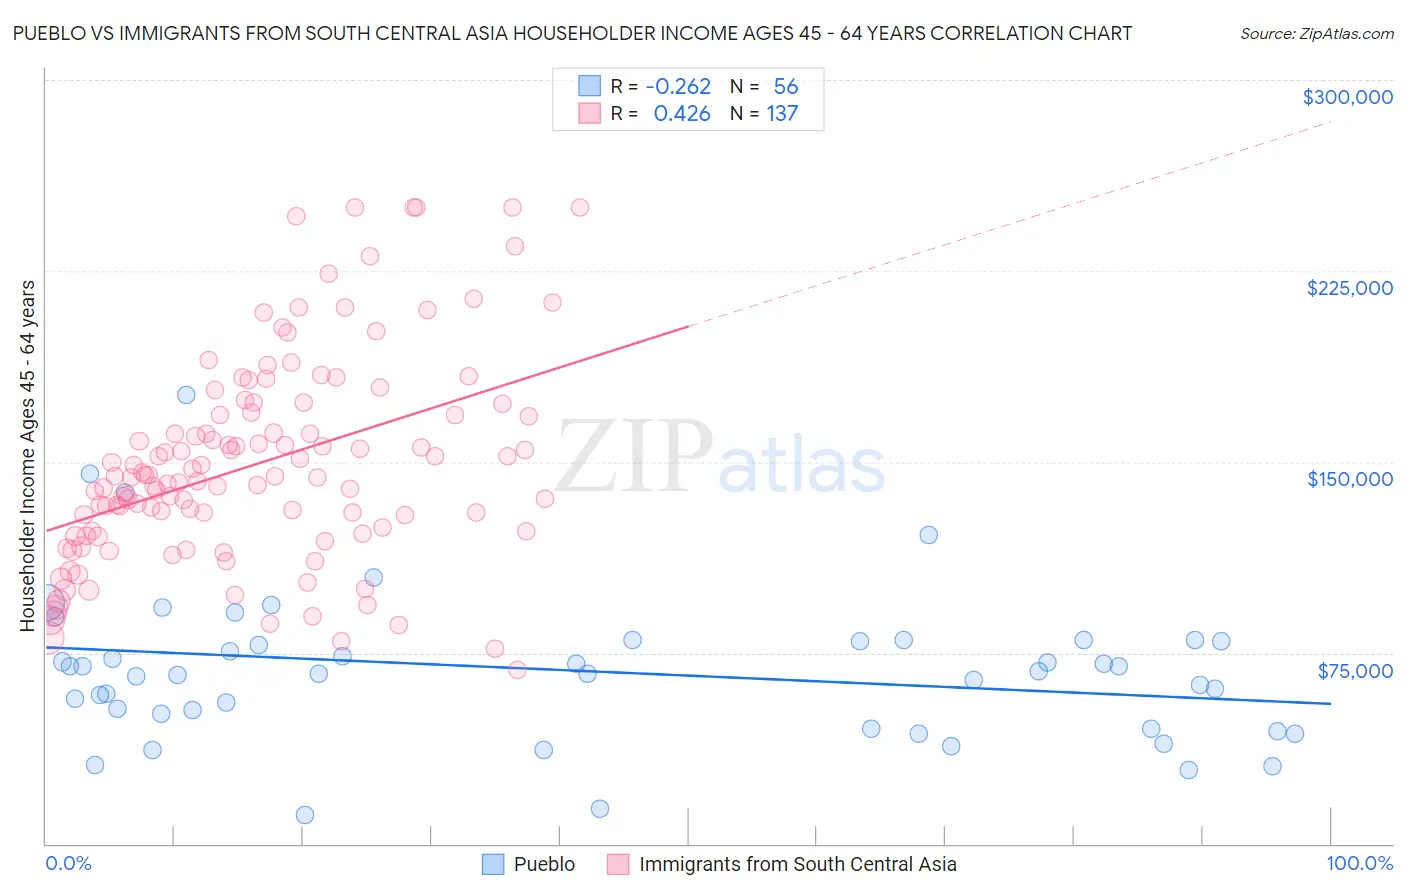 Pueblo vs Immigrants from South Central Asia Householder Income Ages 45 - 64 years